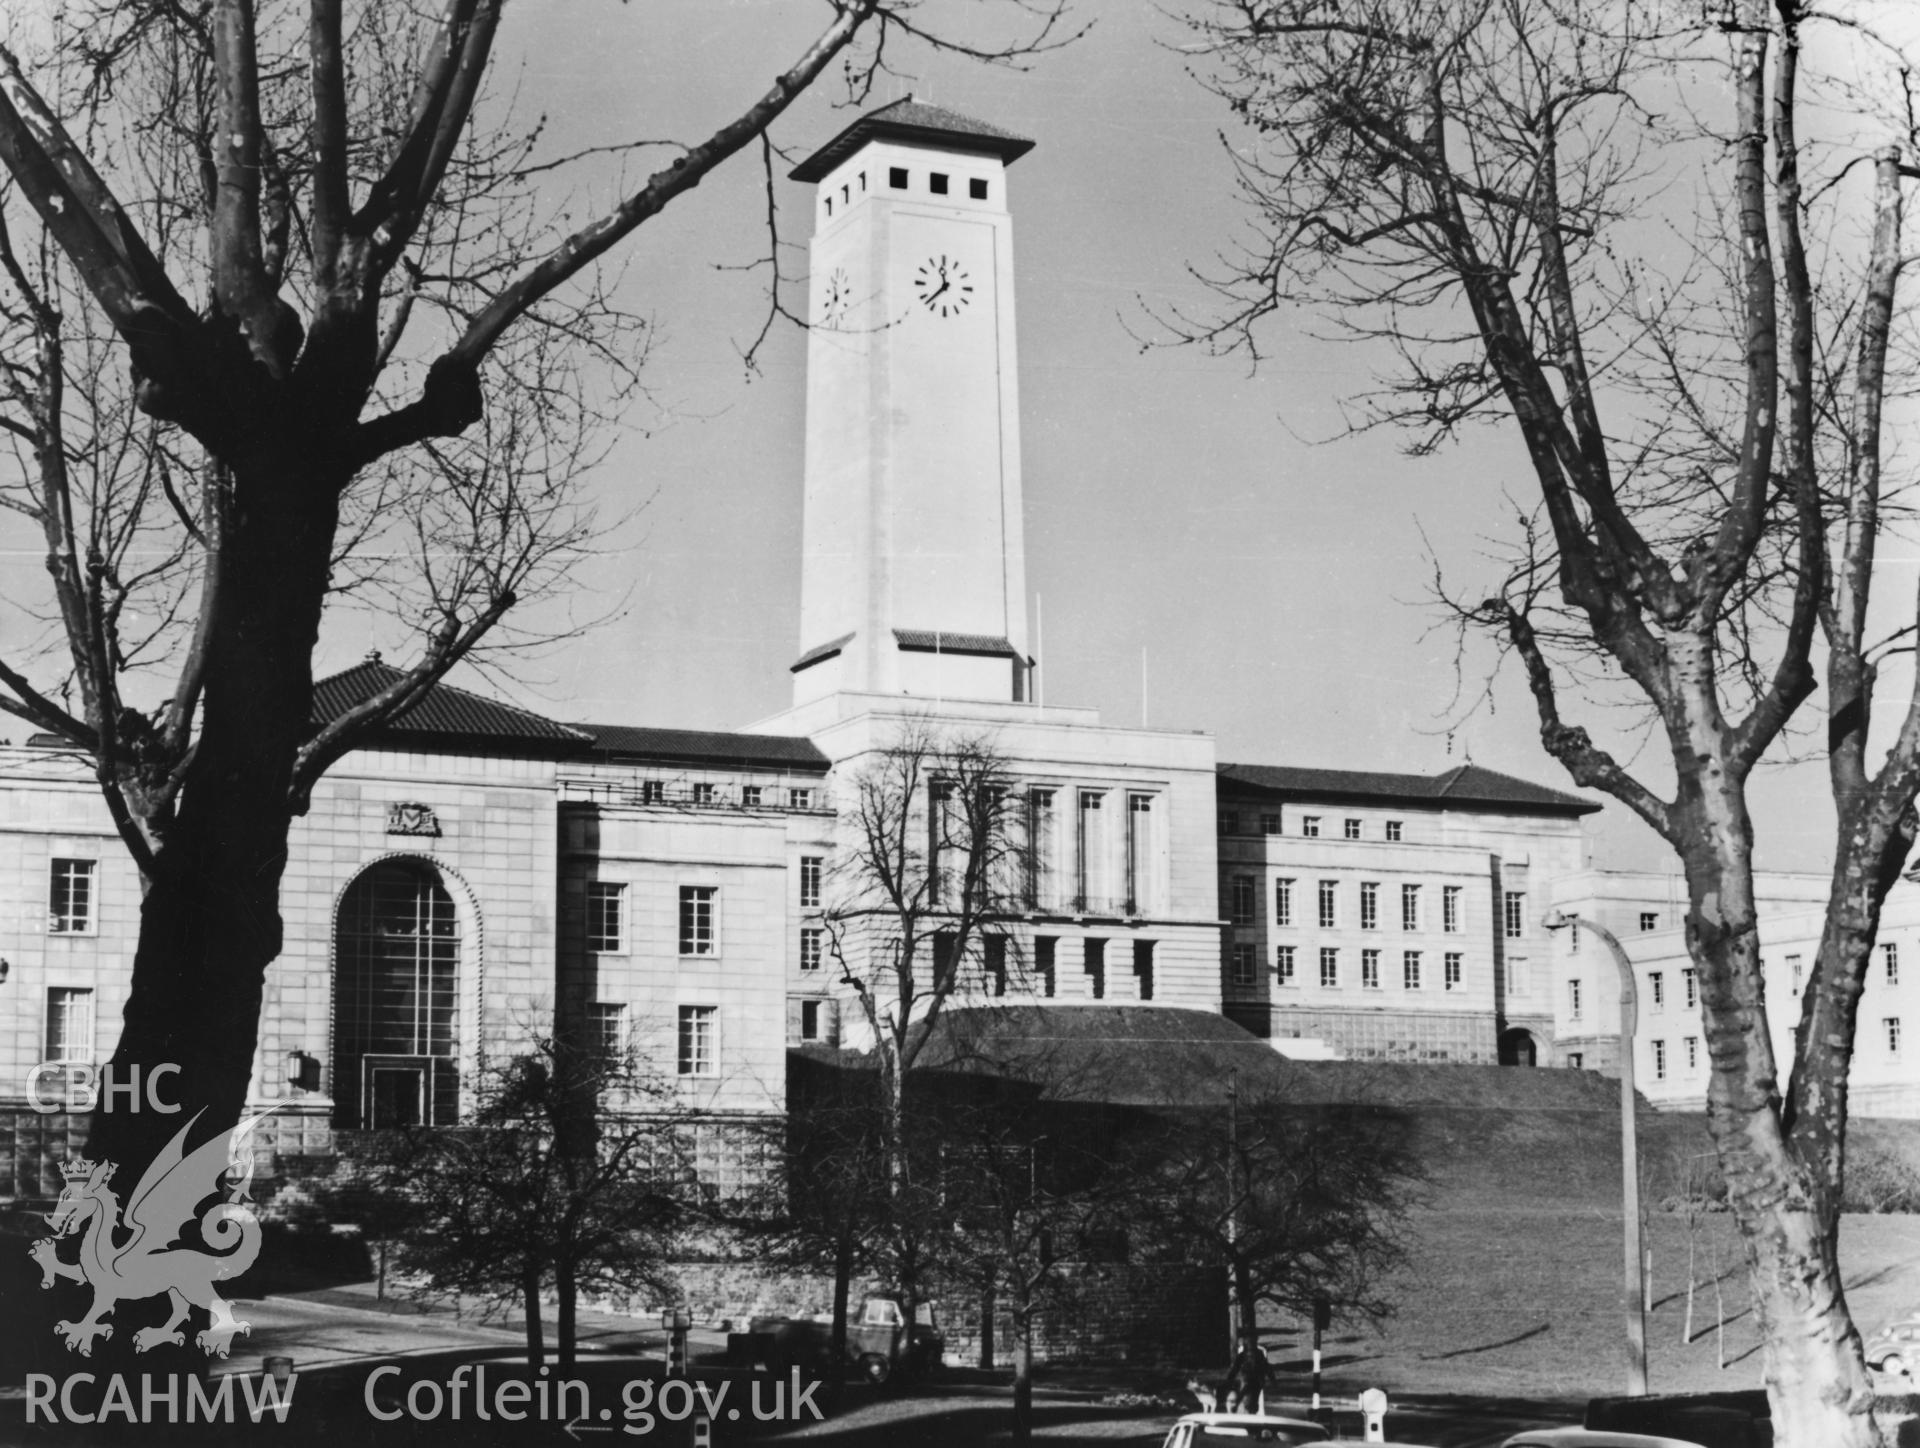 1 b/w print showing exterior view of Newport Civic Centre; collated by the former Central Office of Information.